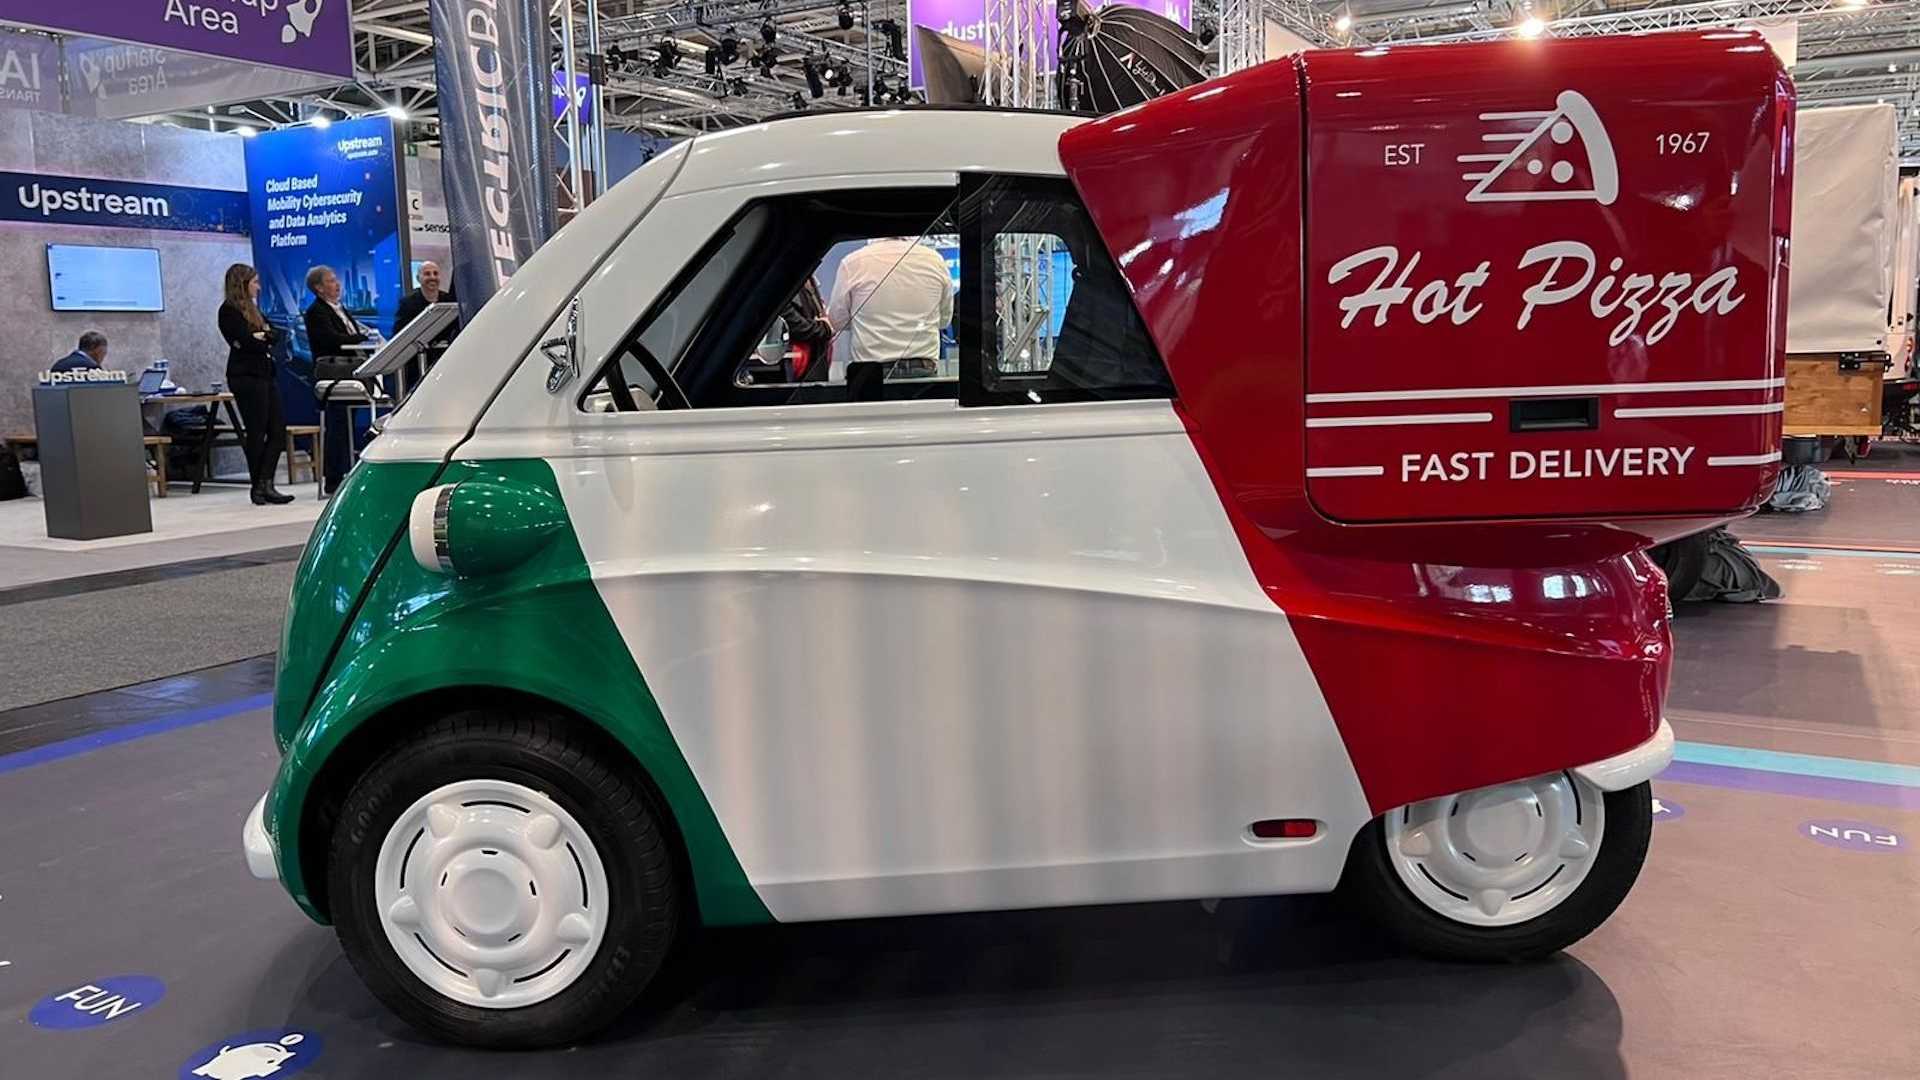 Evetta As An Italian Pizza Delivery EV That's Adorable 